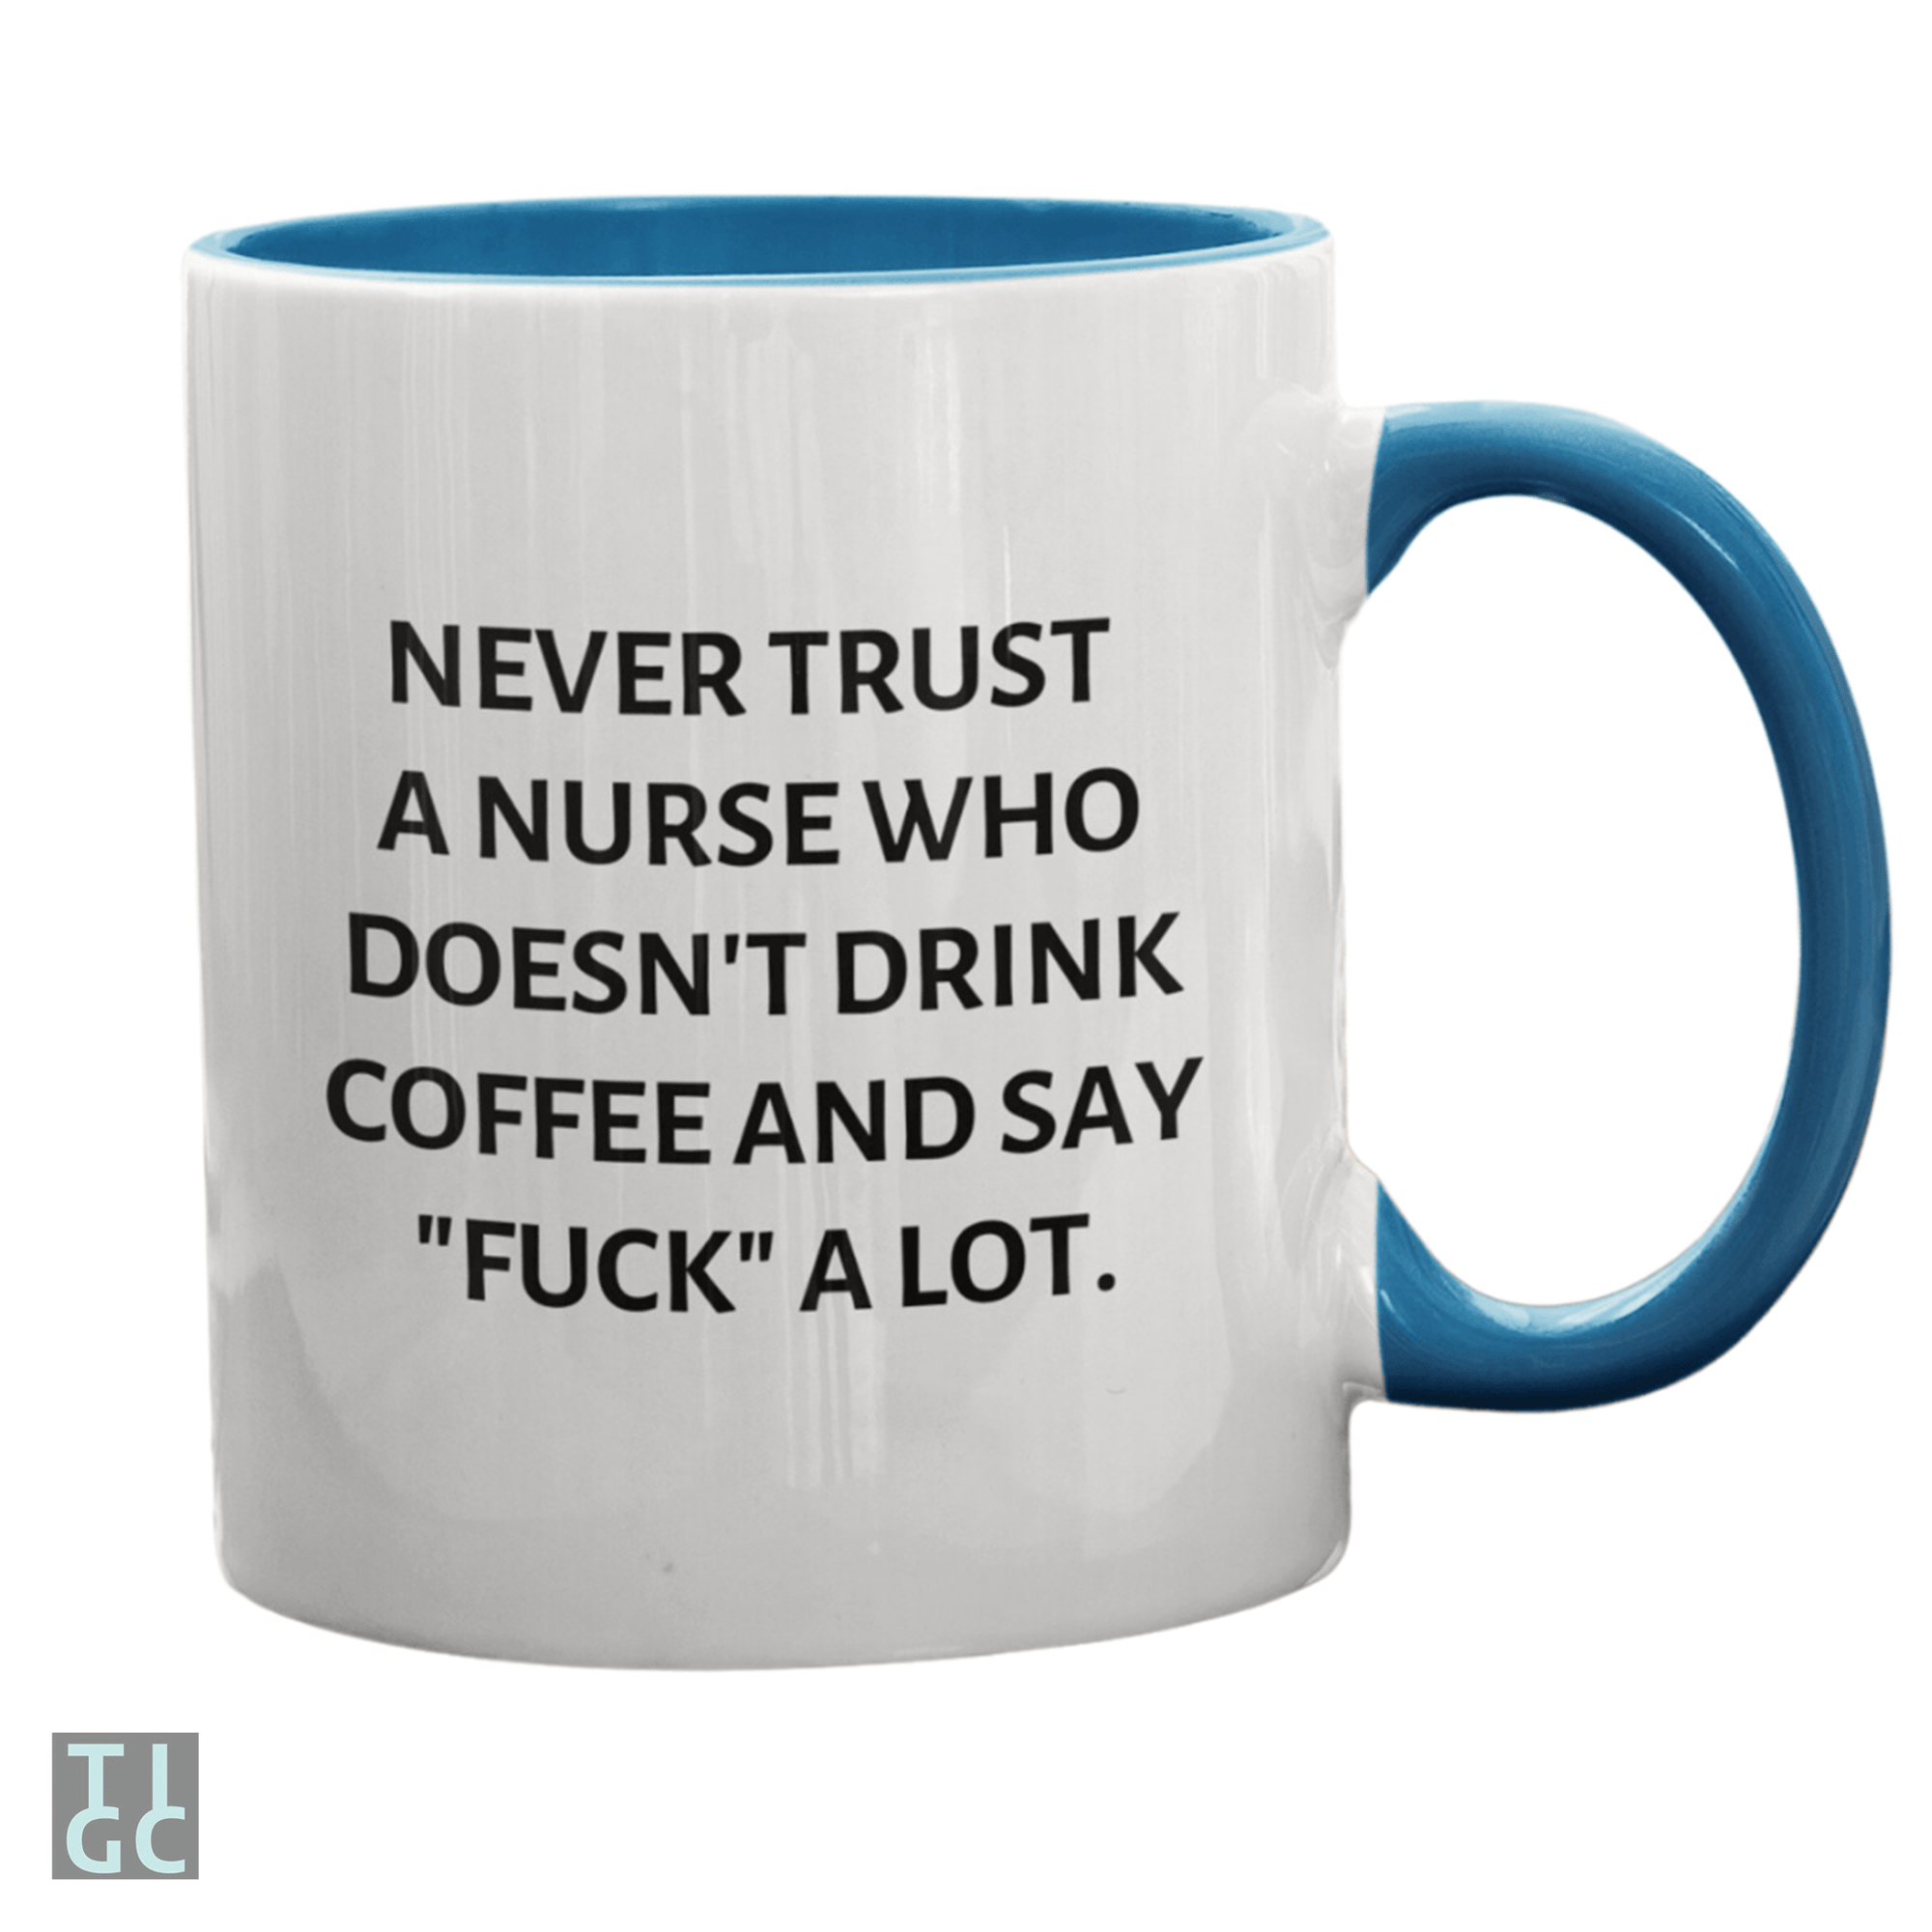 TIGC The Inappropriate Gift Co Never trust a nurse who doesn't drink coffee and say fuck a lot